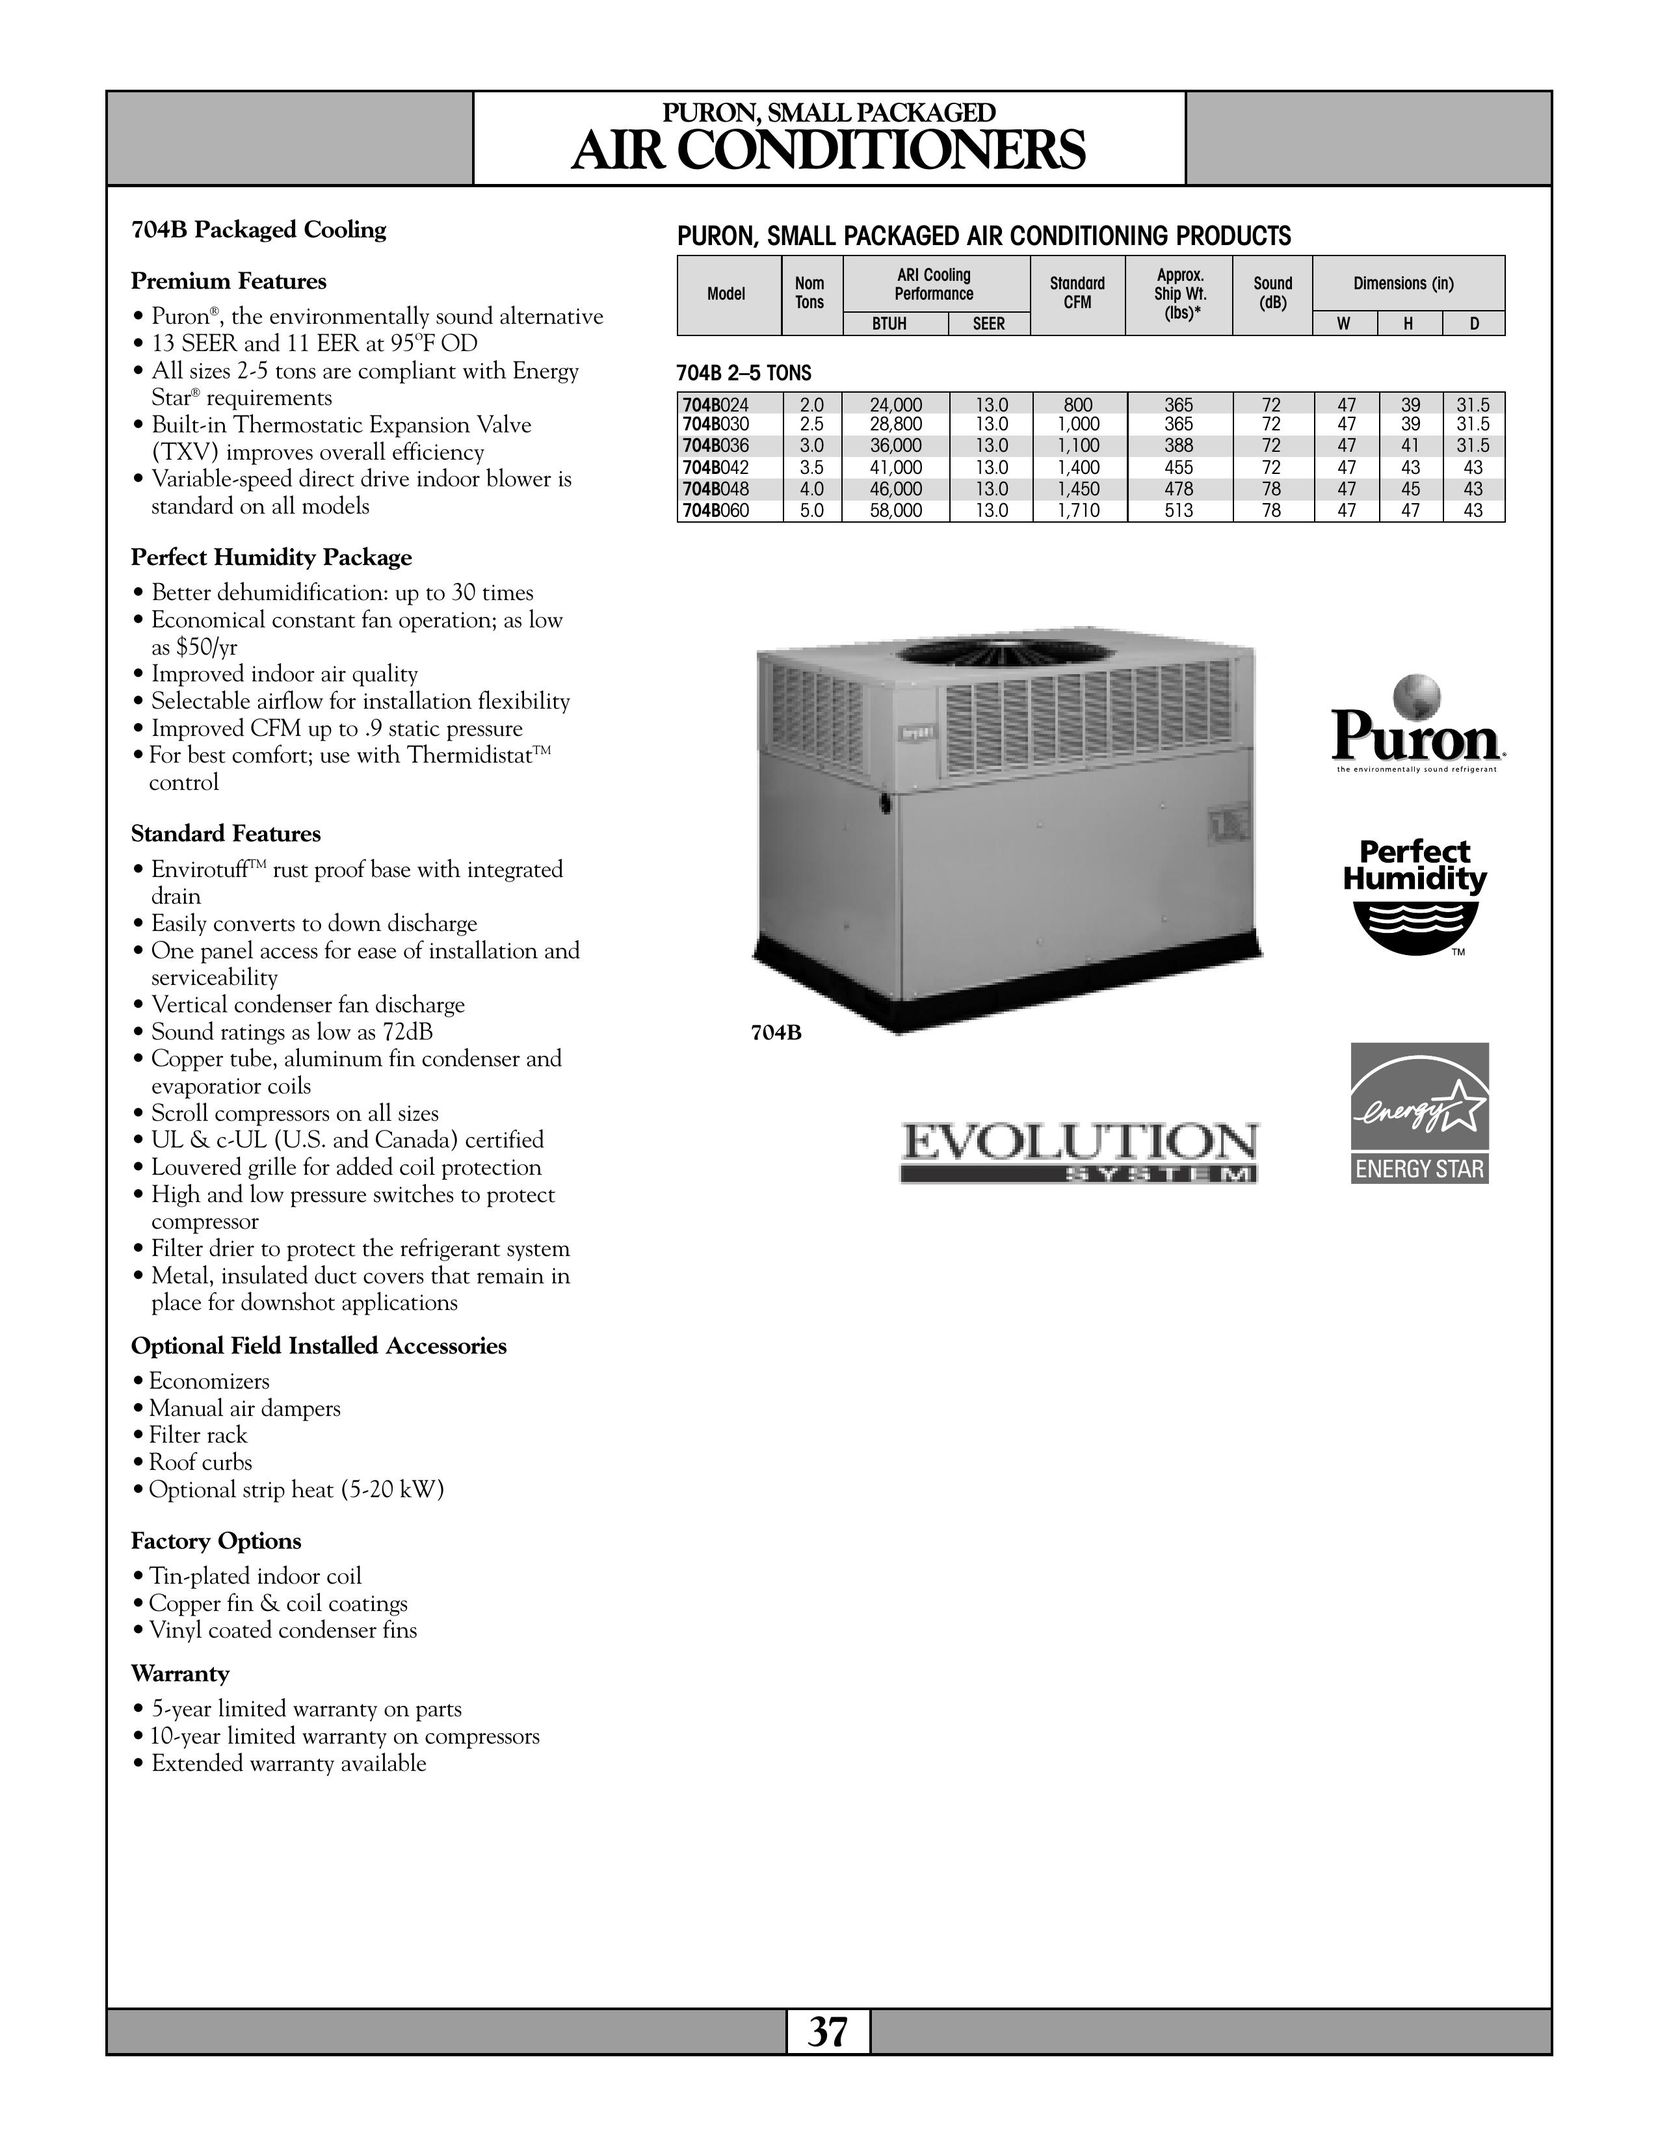 Revolutionary Cooling Systems 704B042 Air Conditioner User Manual